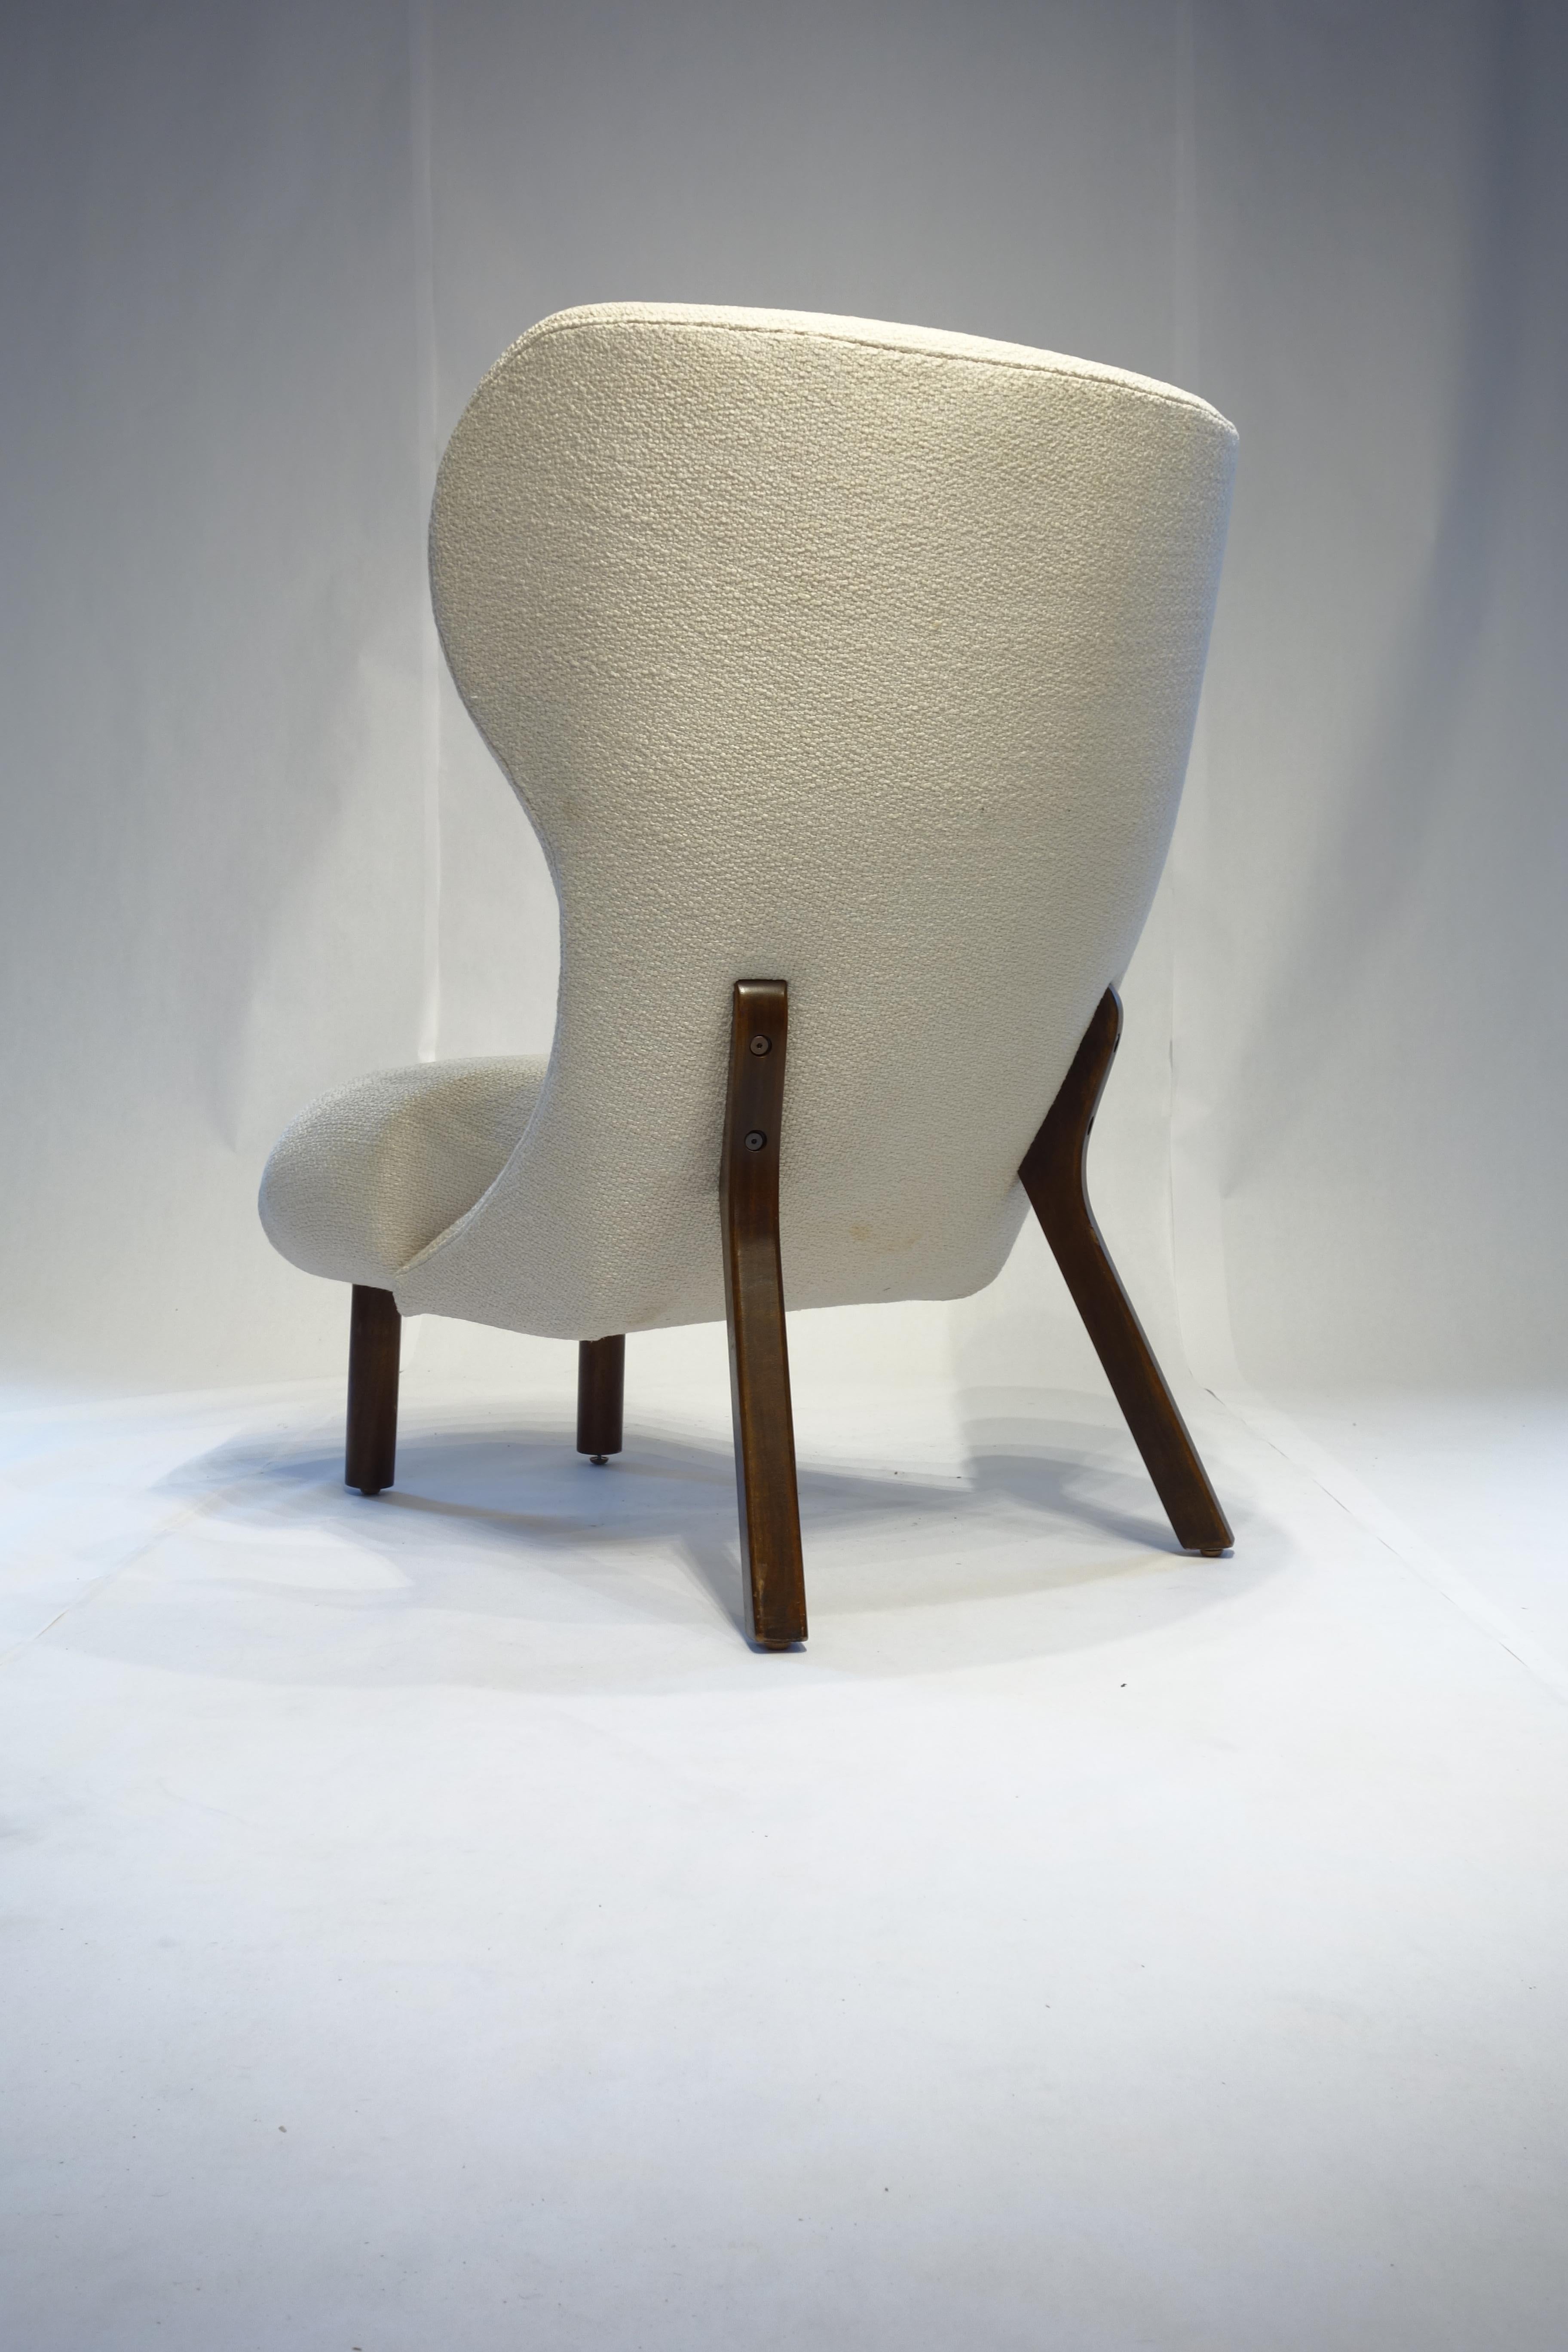 Contemporary 21 Century Fresh Pond Mod Wing Chair by Michael Del Piero, Made to Order For Sale